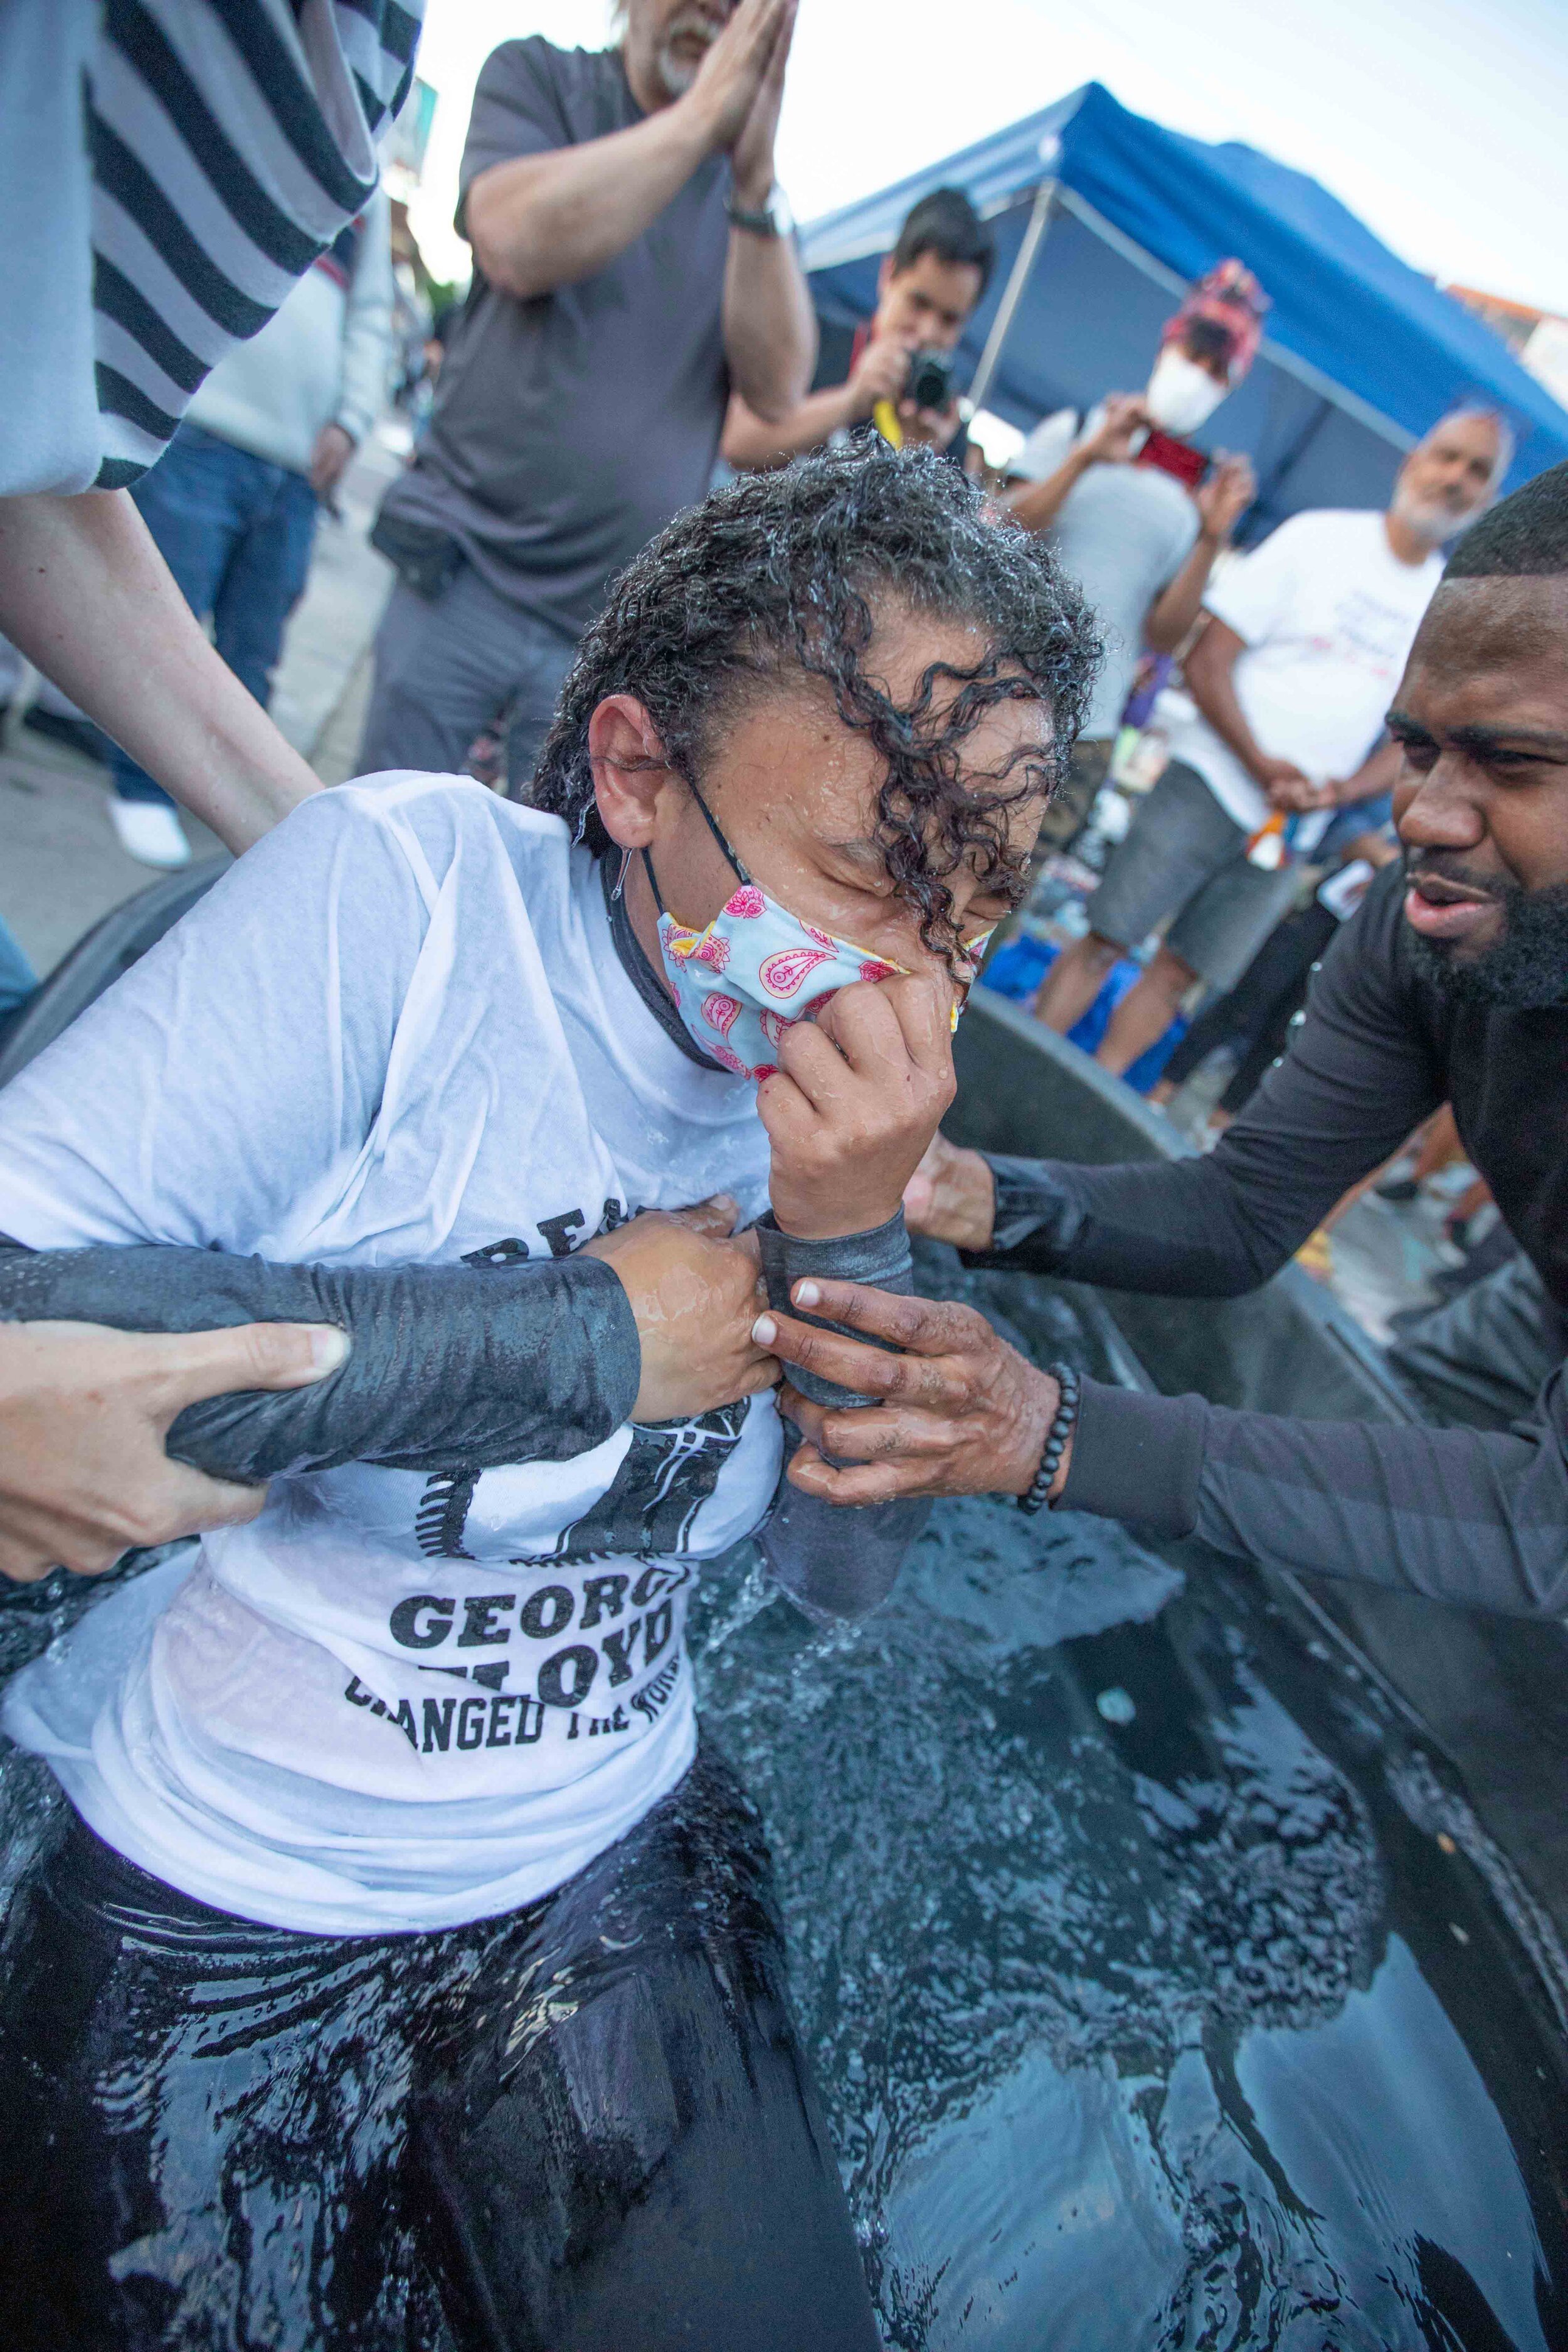  Sade Strong (left) is baptised on the street of George Floyd Square as Pastor Joshua Giles (right) pulls her out of the water in Minneapolis, Minnesota on Jun 13, 2020. 